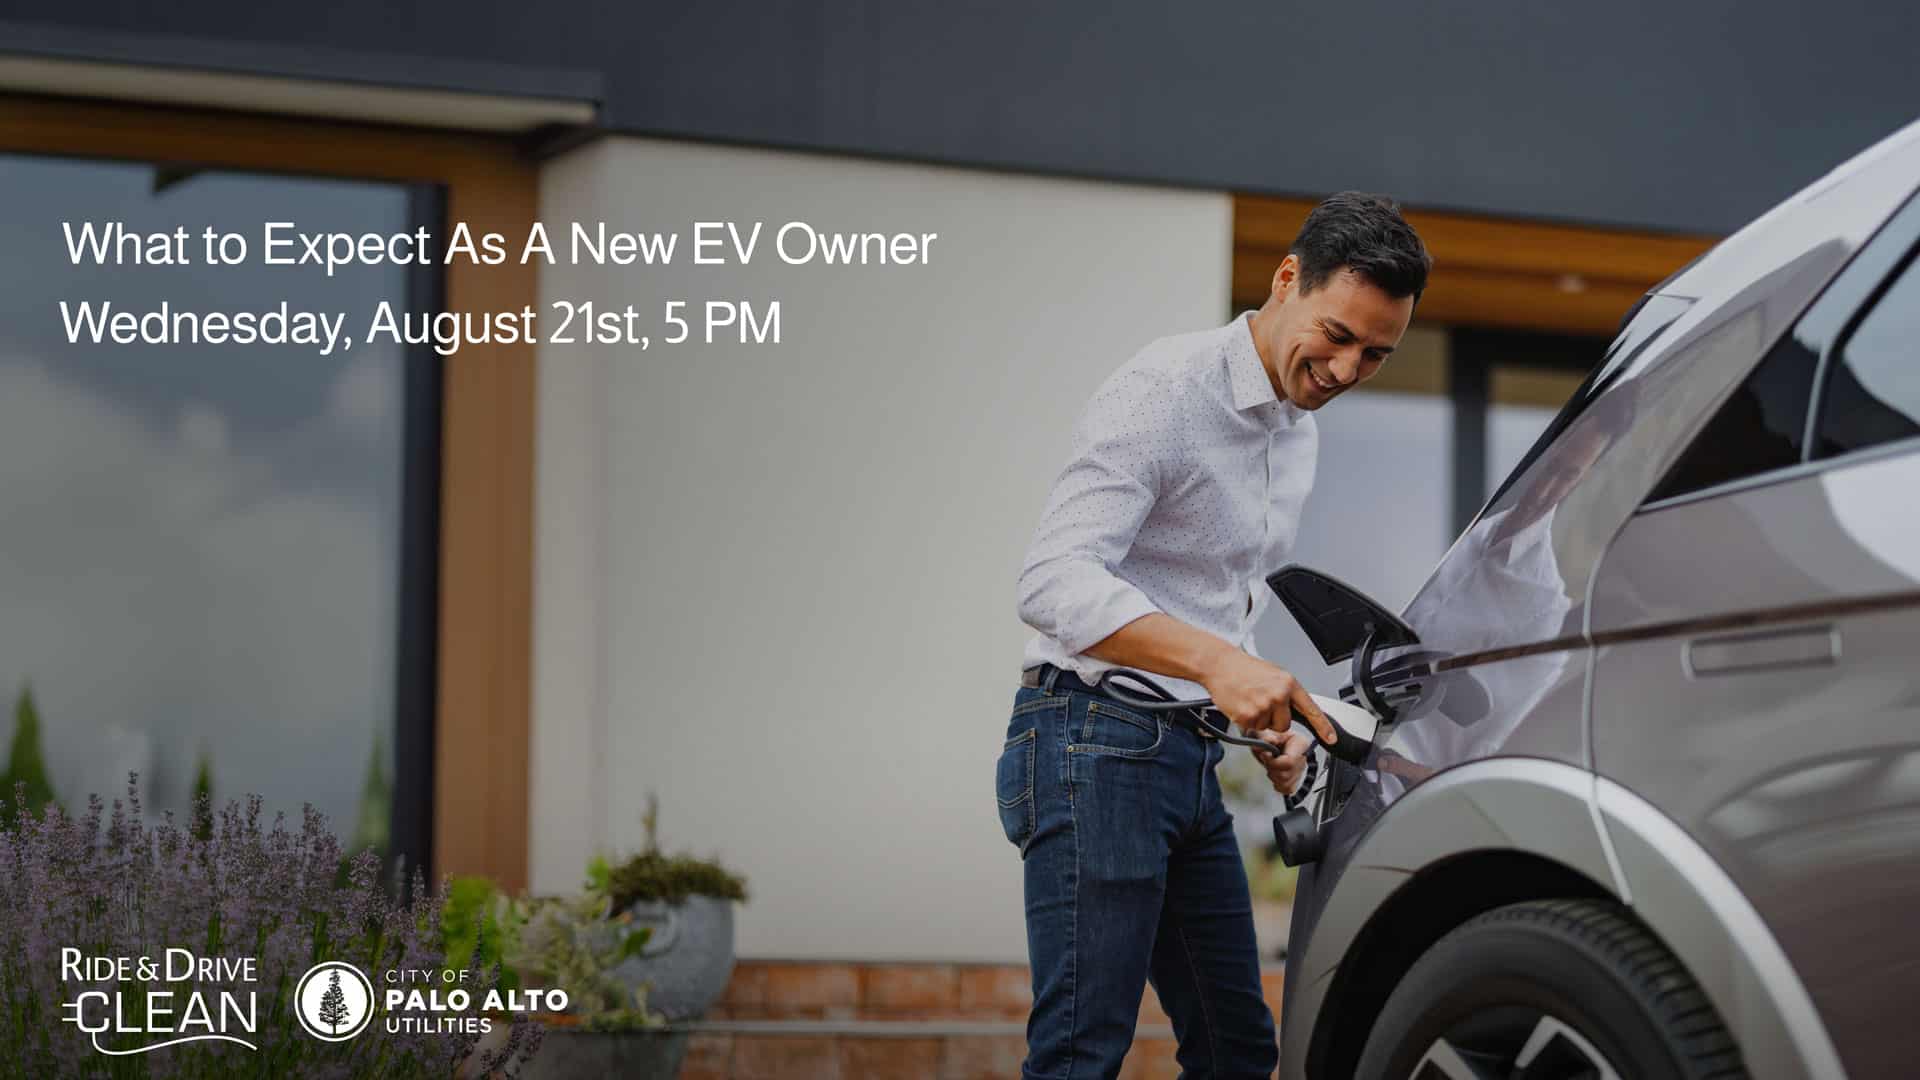 Ride and Drive Clean Webinar for what to expect as a new ev owner